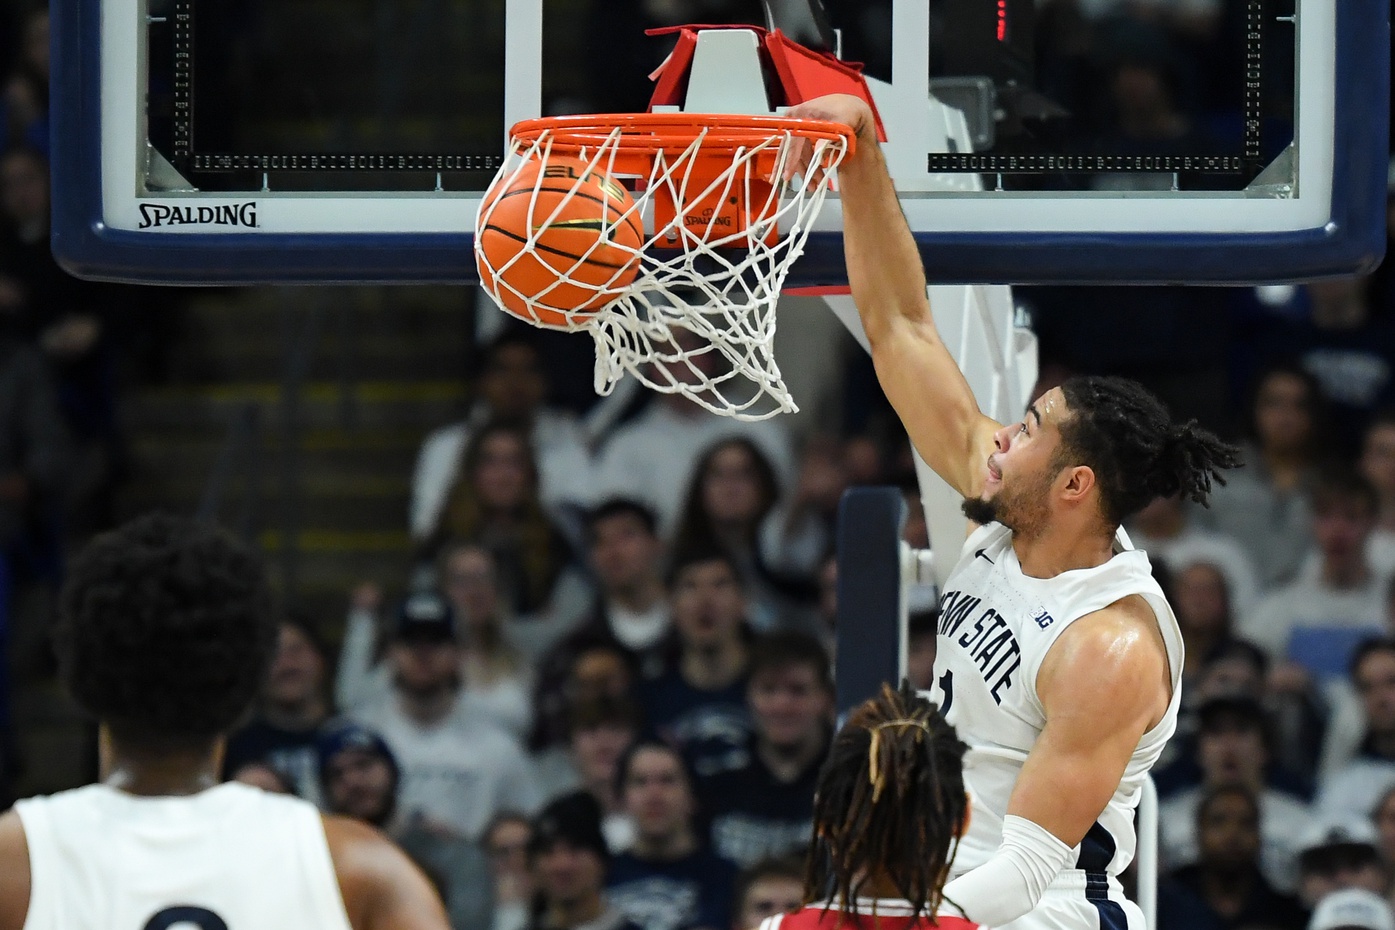 college basketball picks Seth Lundy Penn State Nittany Lions predictions best bet odds